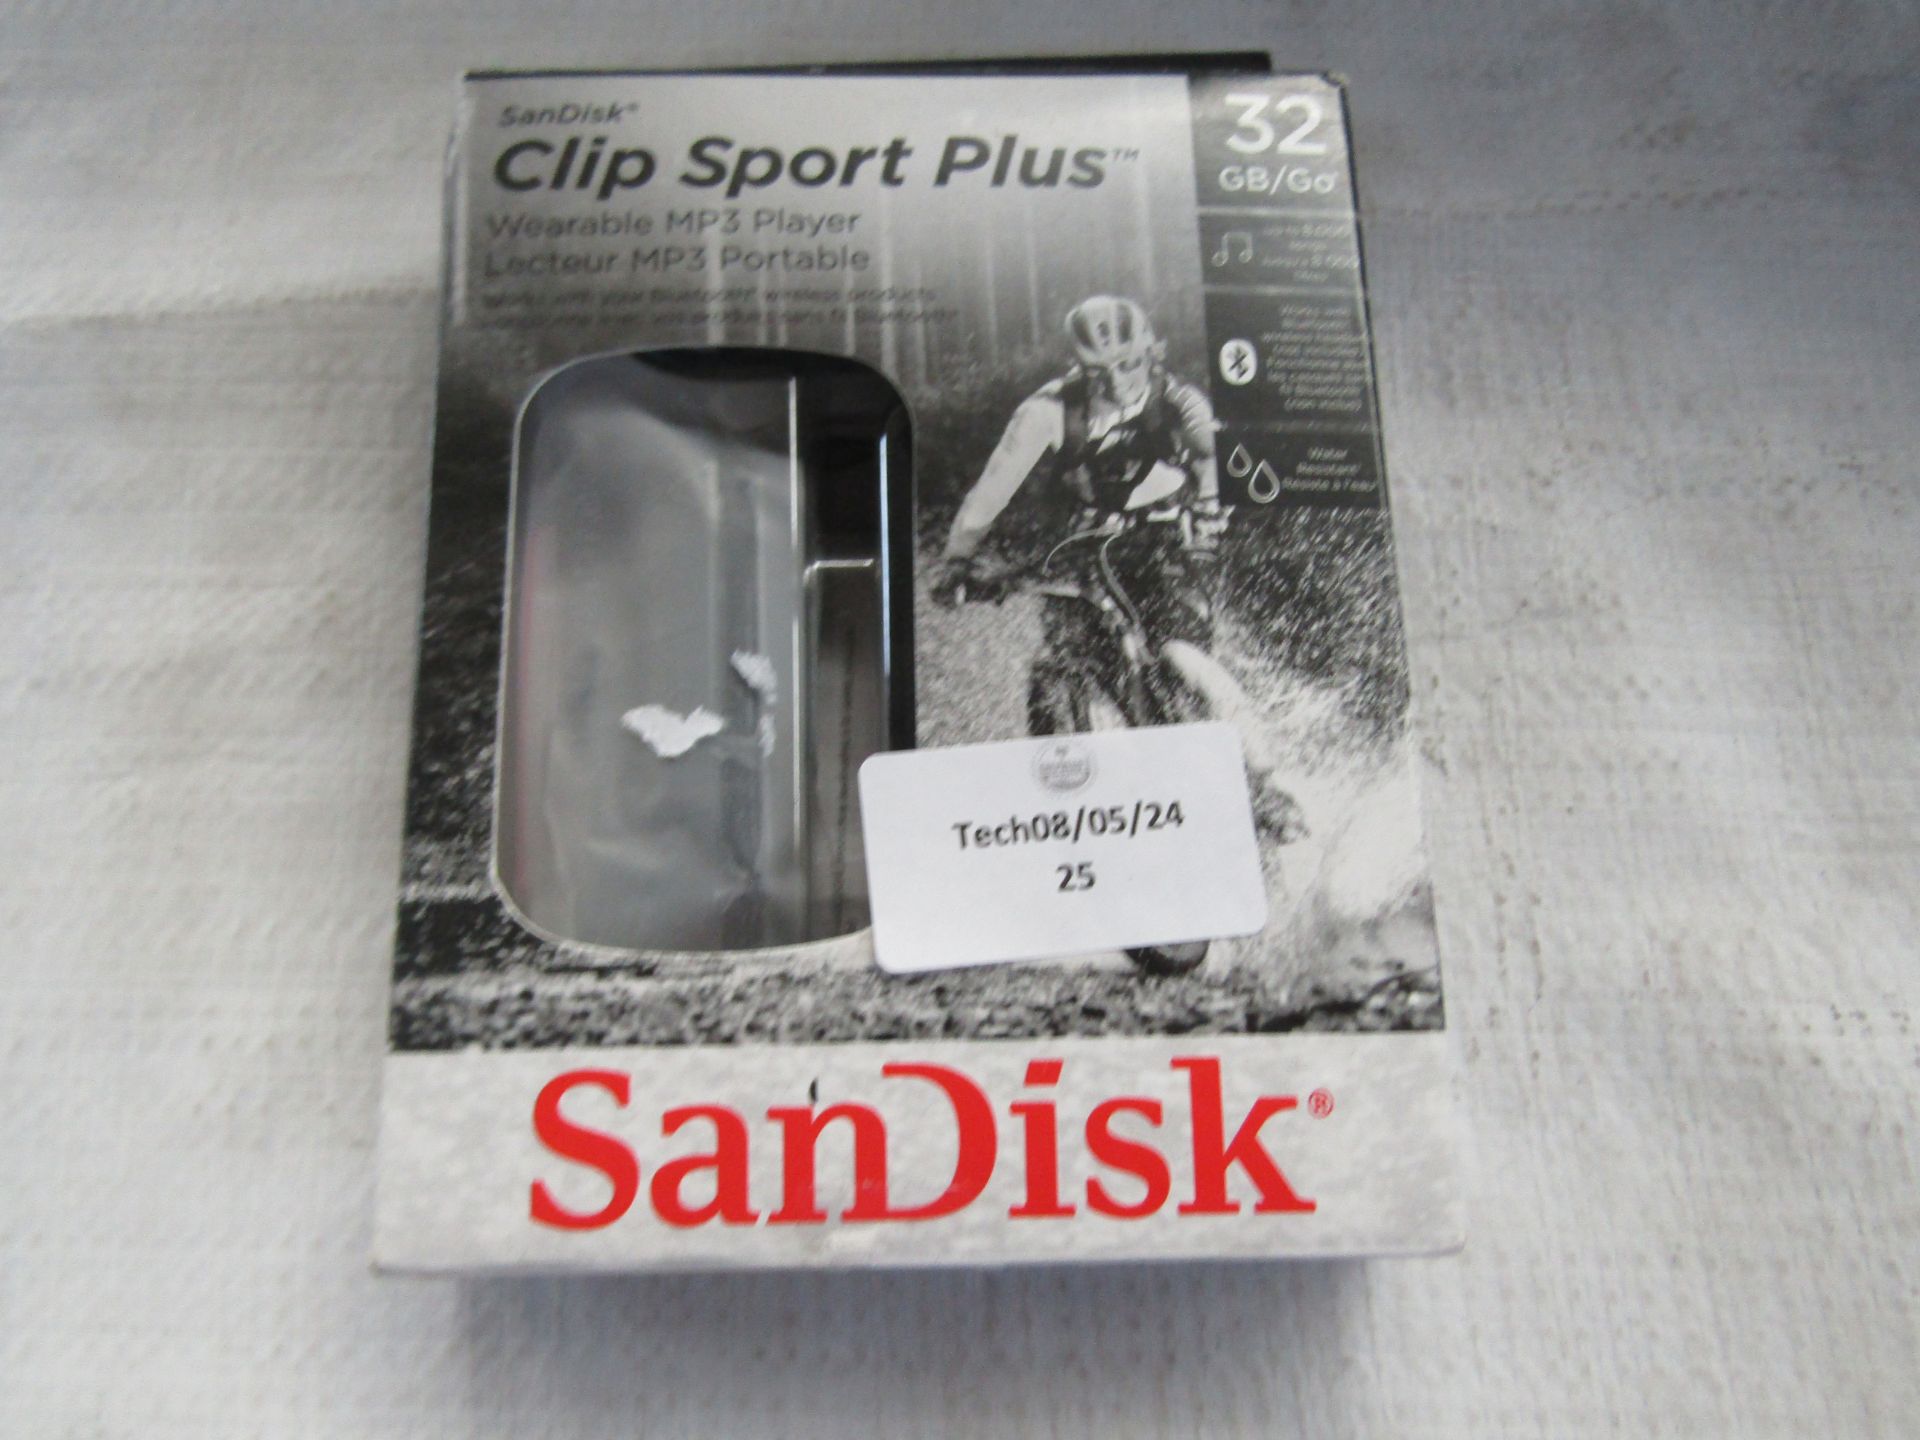 Sandisk 32GB Clip Sport Plus Wearable MP3 Player - Unchecked & Boxed - RRP CIRCA £48.78